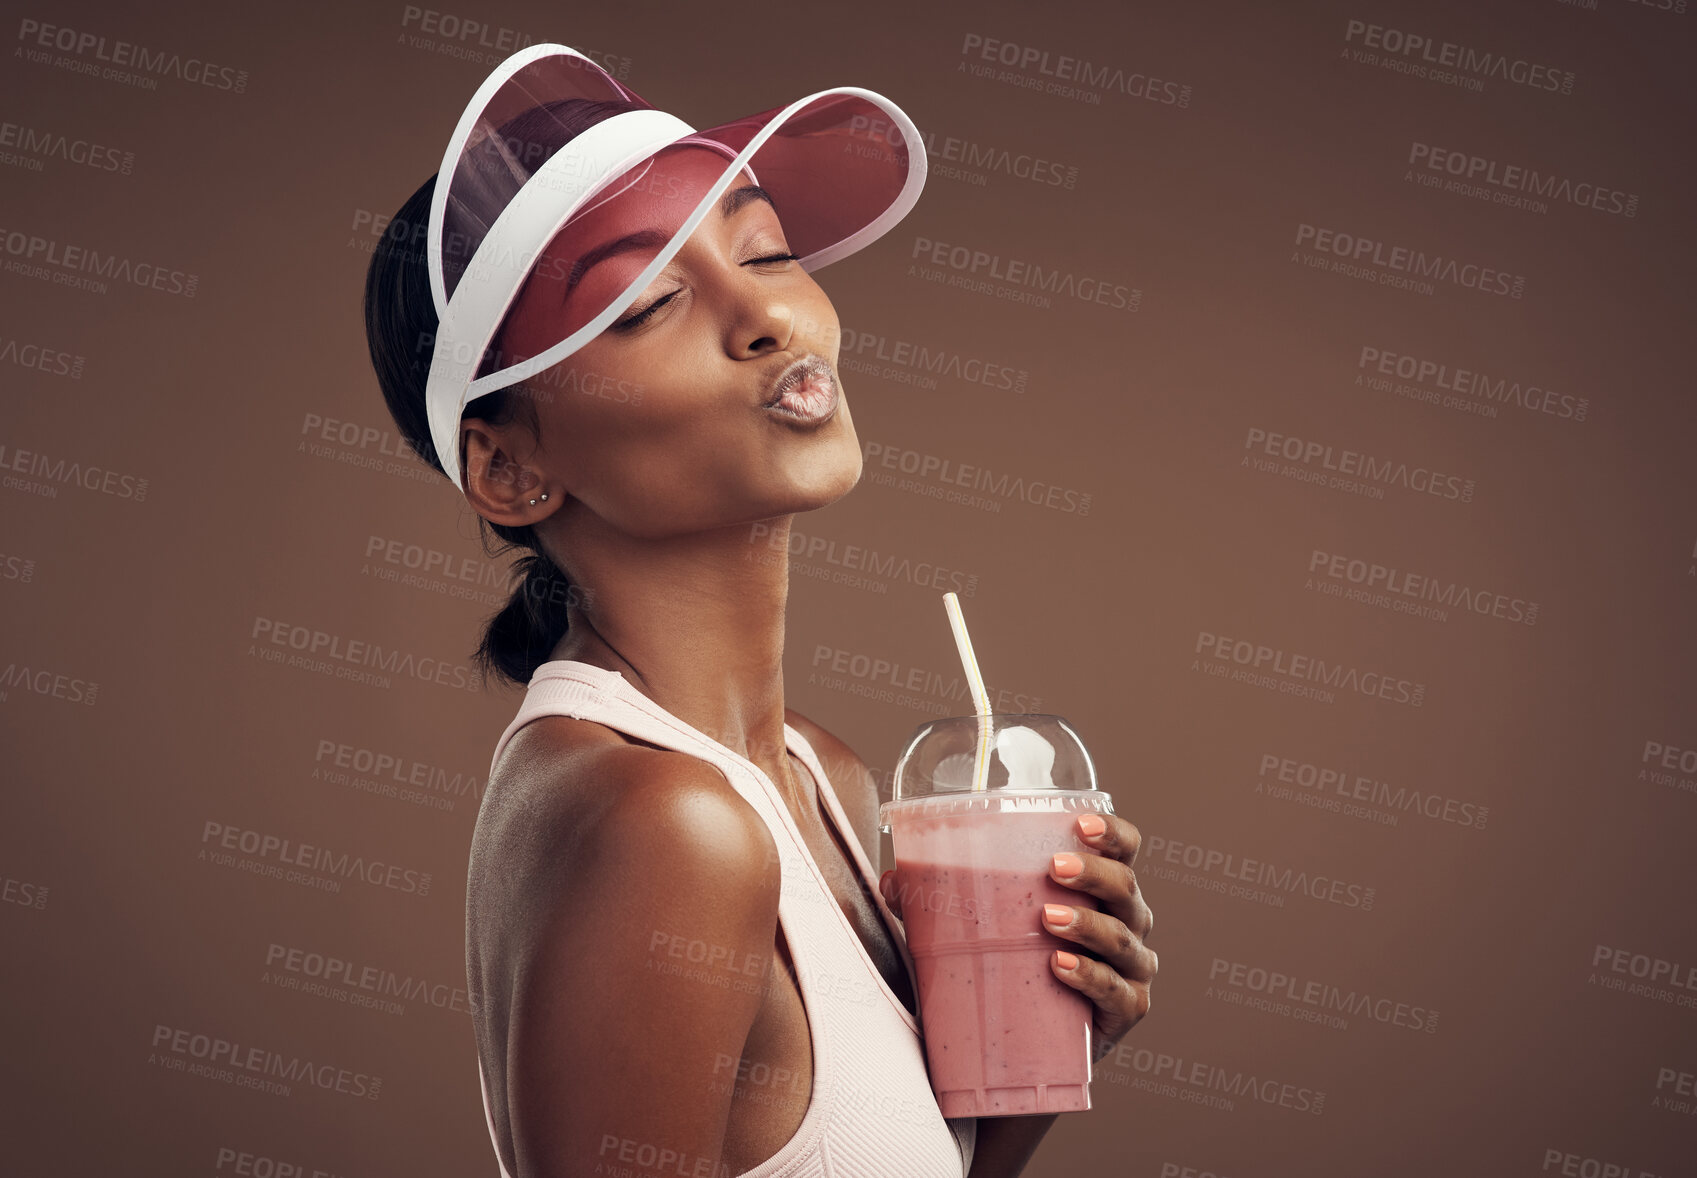 Buy stock photo Shot of an attractive young woman standing alone in the studio and feeling playful while enjoying a smoothie